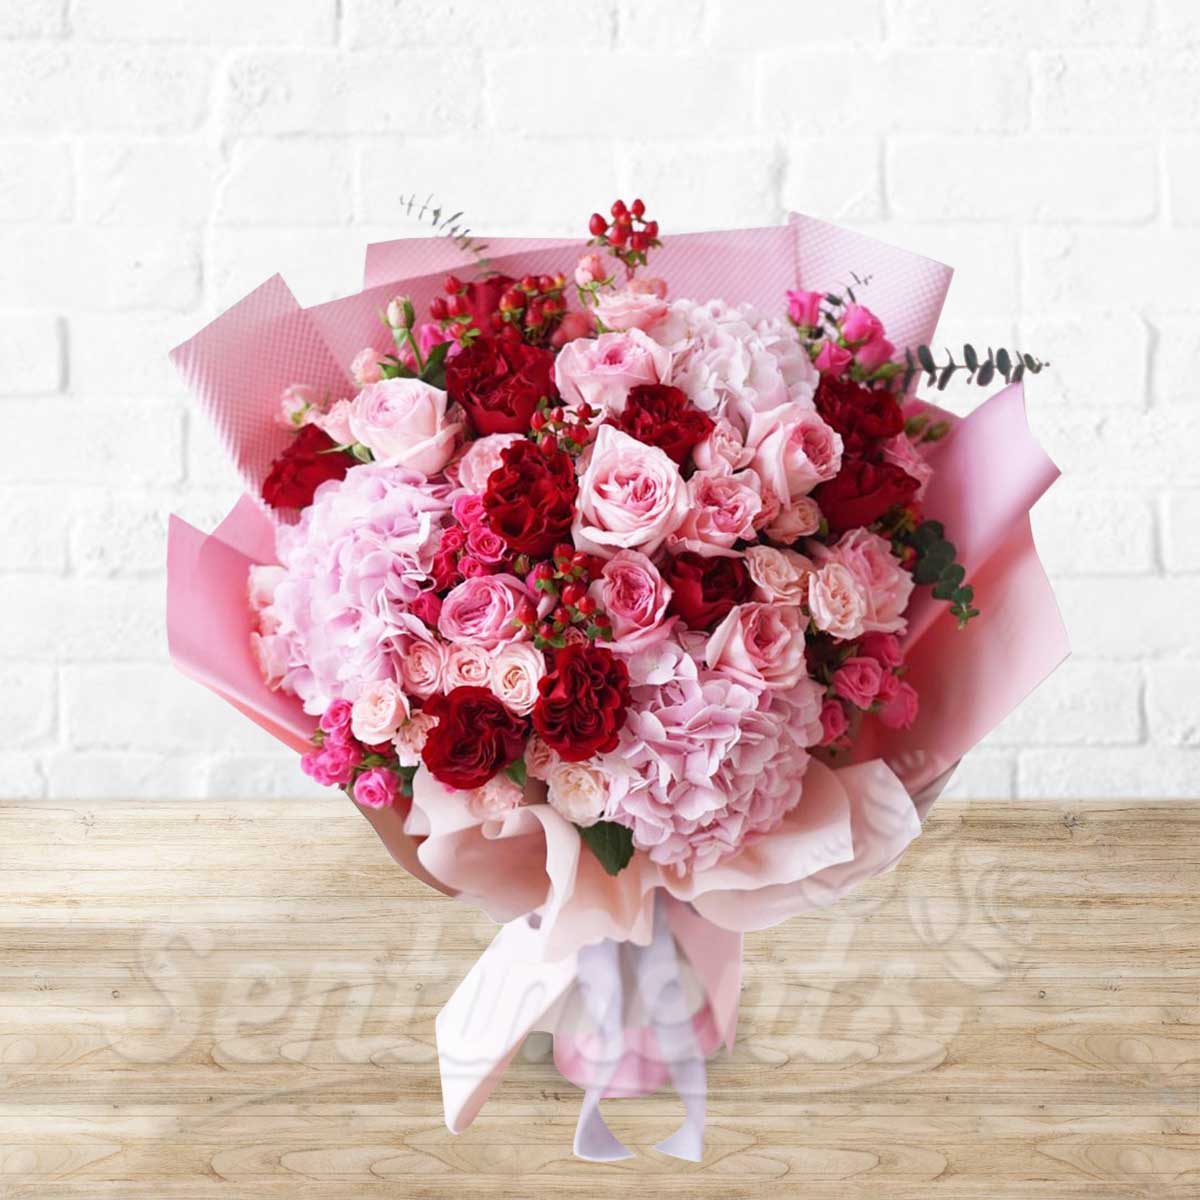 Exquisite  Pinkie Promise Mixed Flowers Hand Bouquet